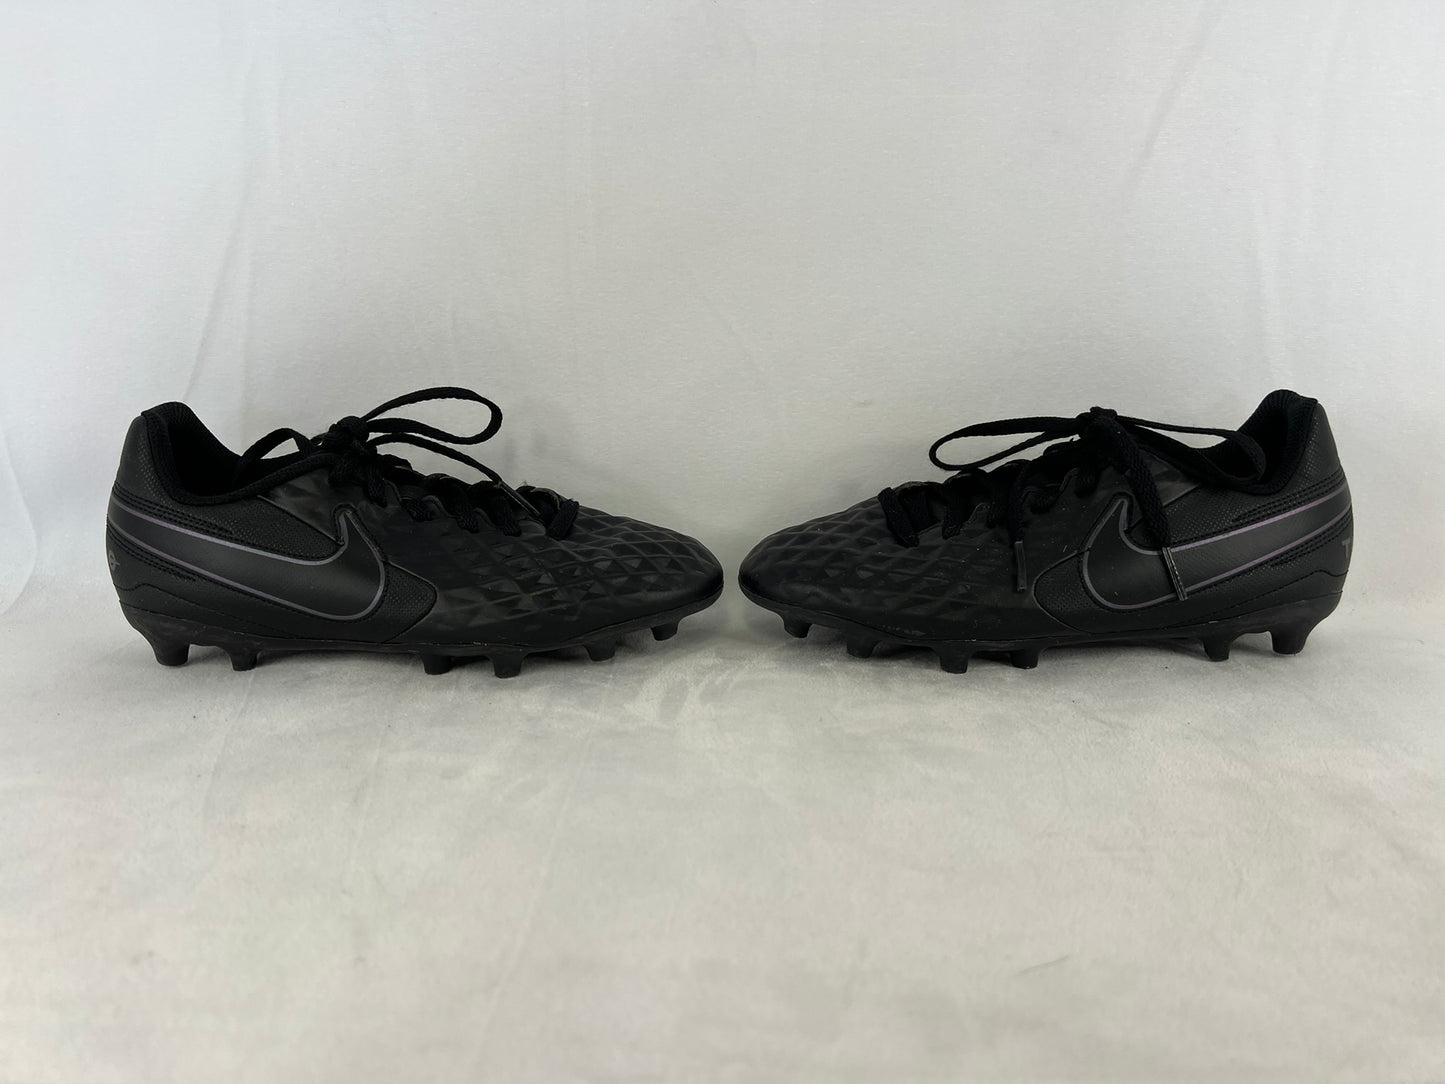 Soccer Shoes Cleats Child Size 4 Nike Tiempo Black and Magenta Excellent